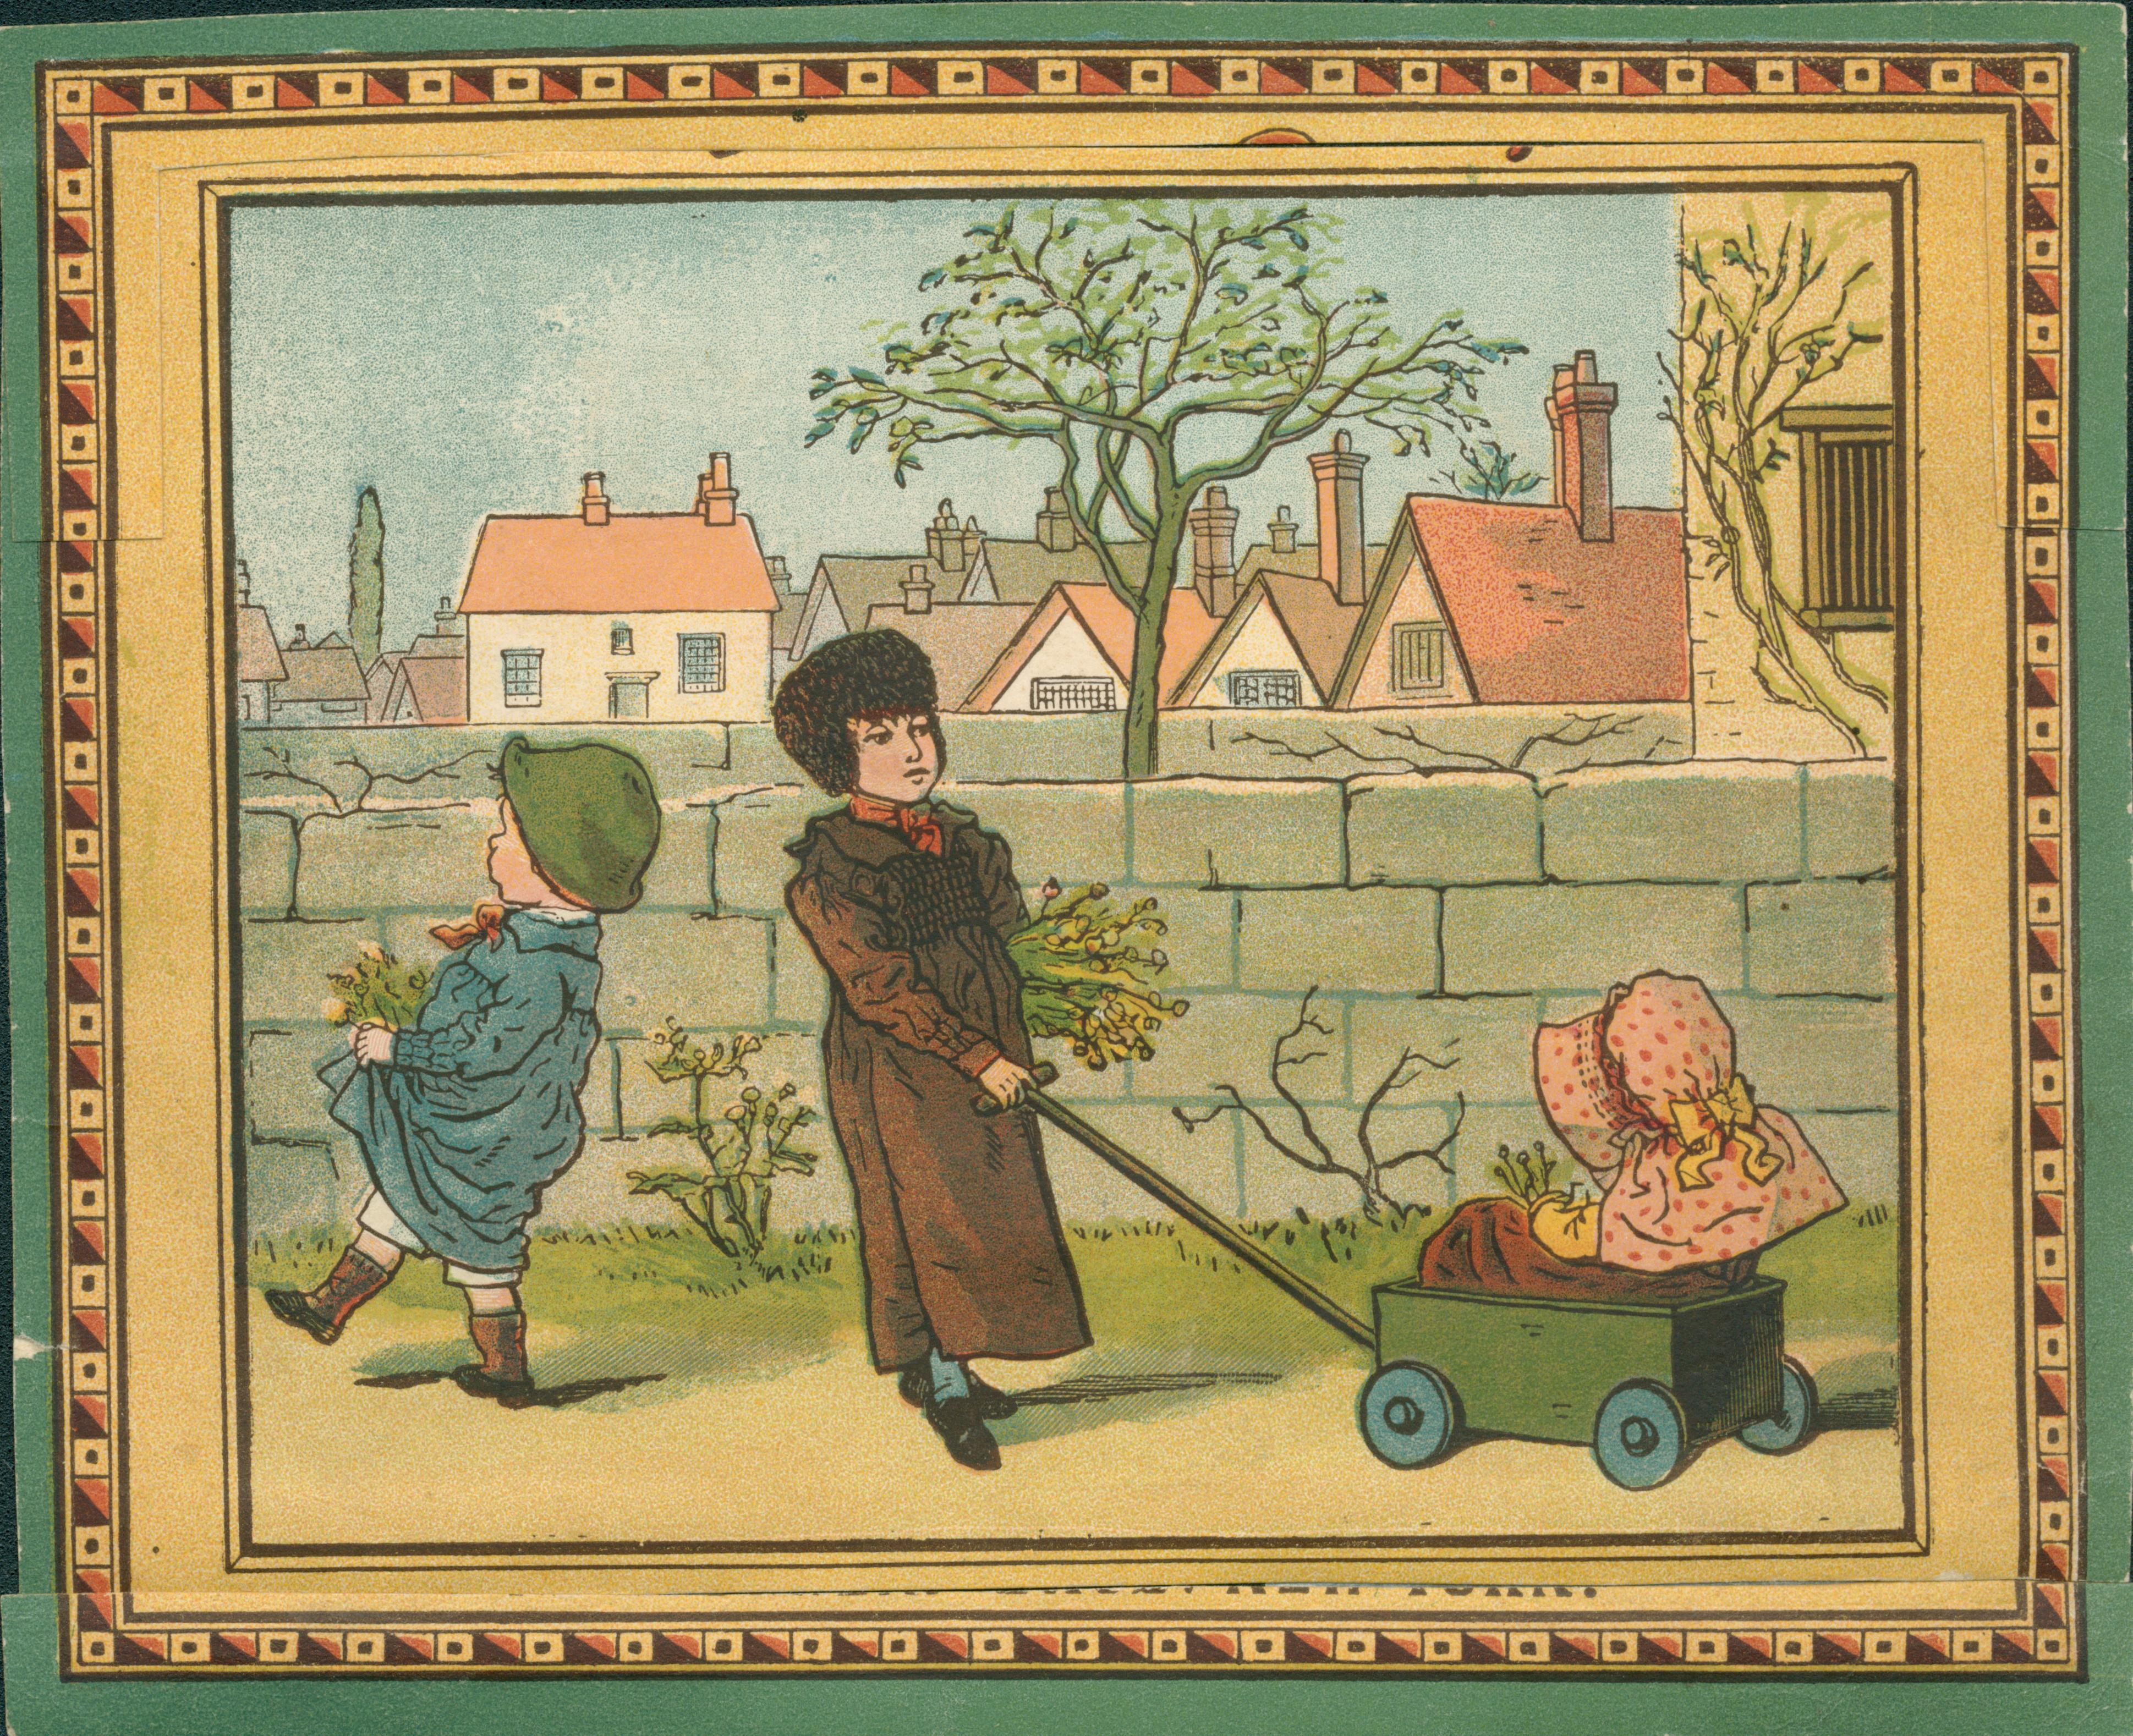 This trade card shows three children in front of a low stone wall; one child is in wagon while another child holds wagon handle and flowers. The third child is walking ahead.